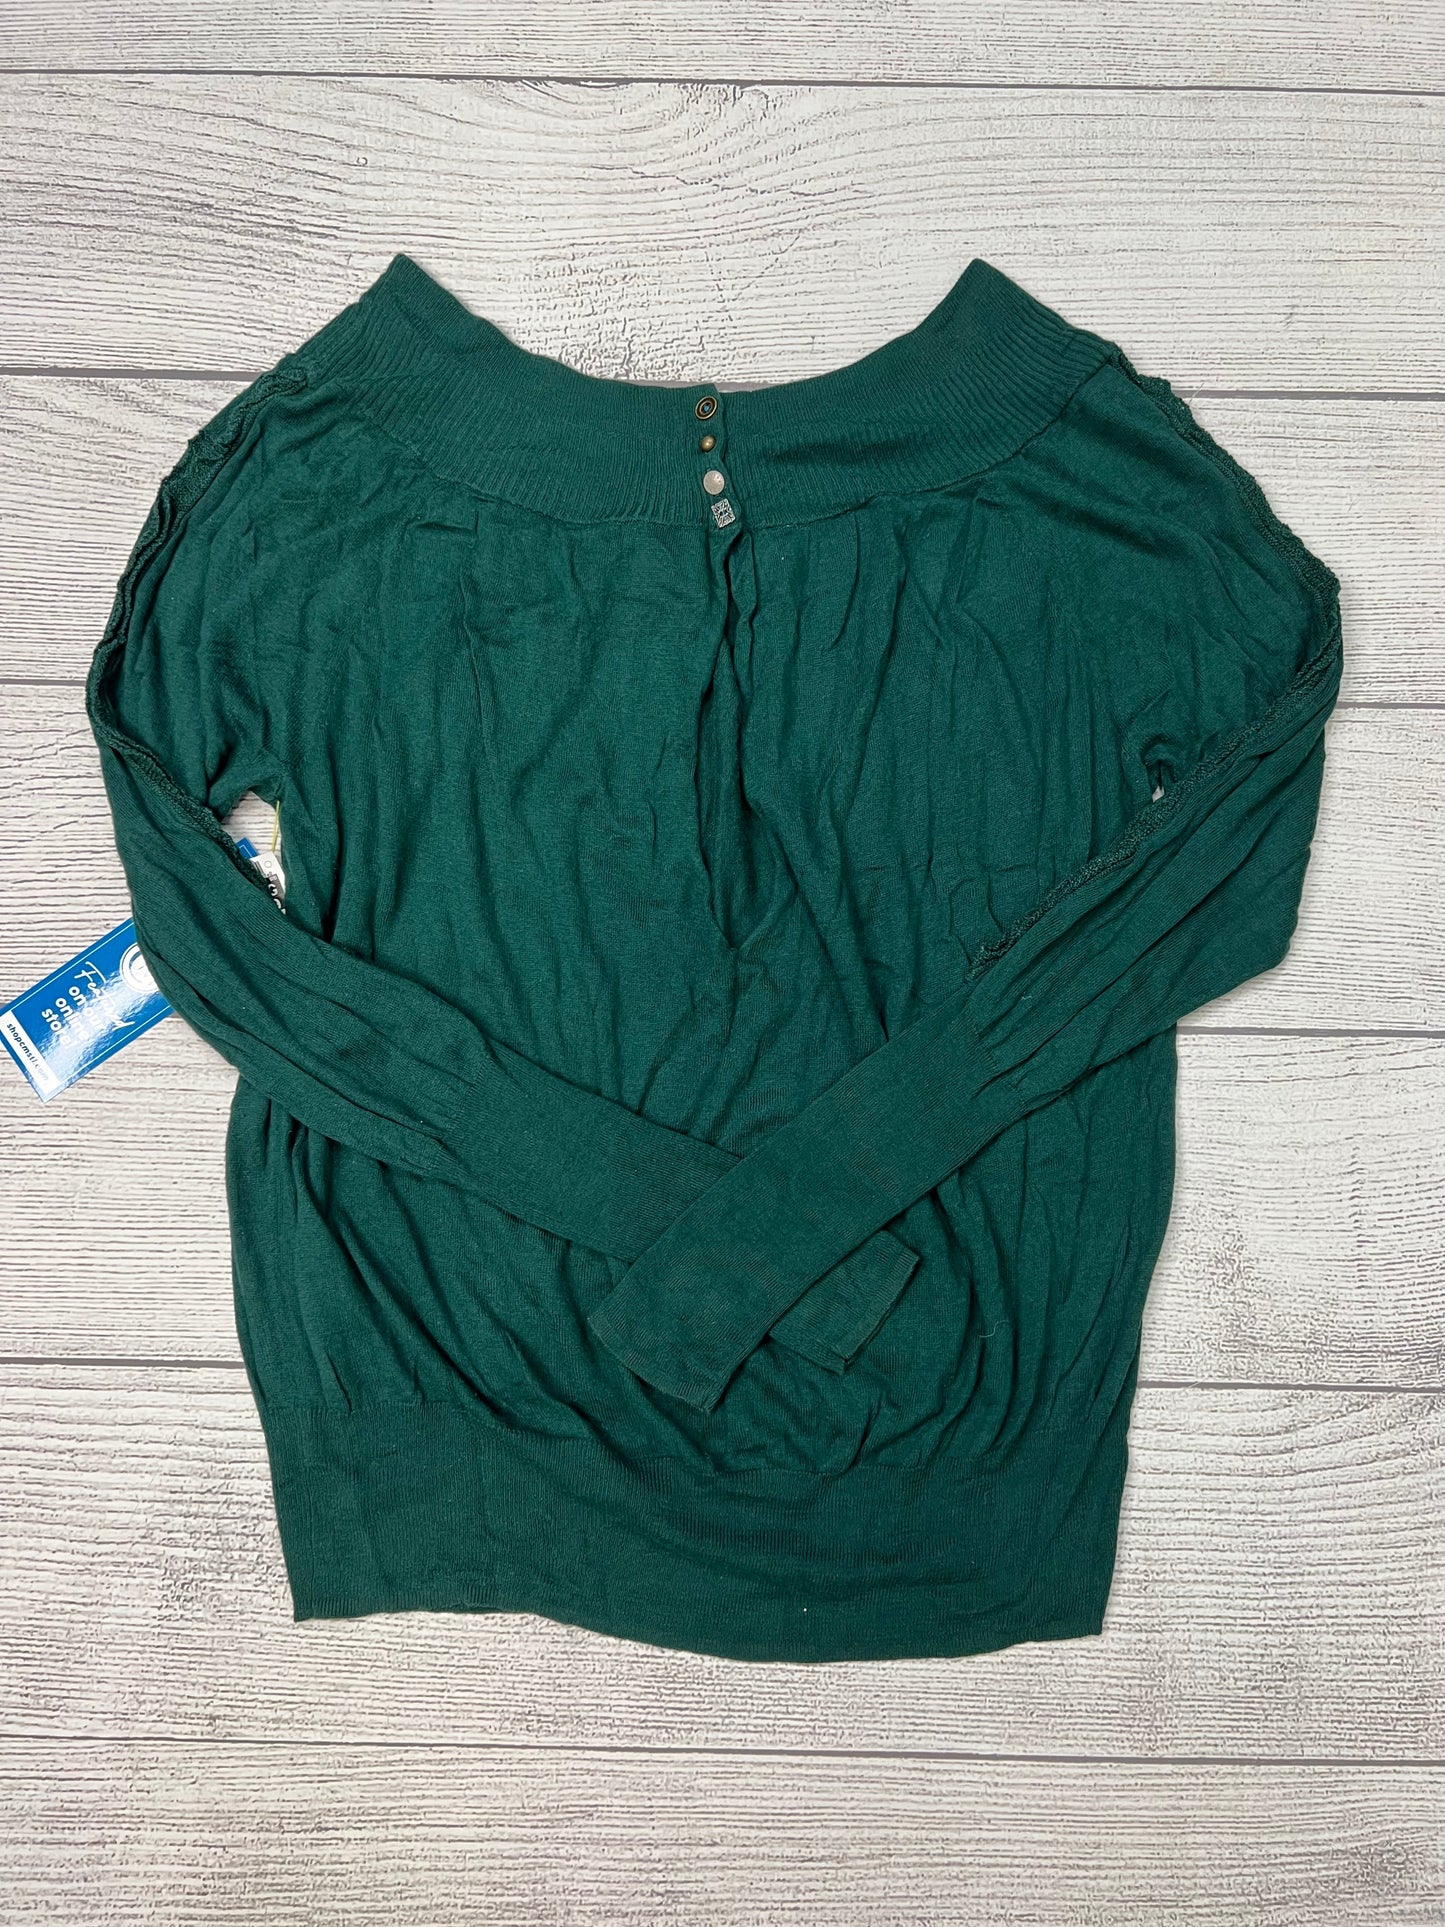 Green Sweater Free People, Size L